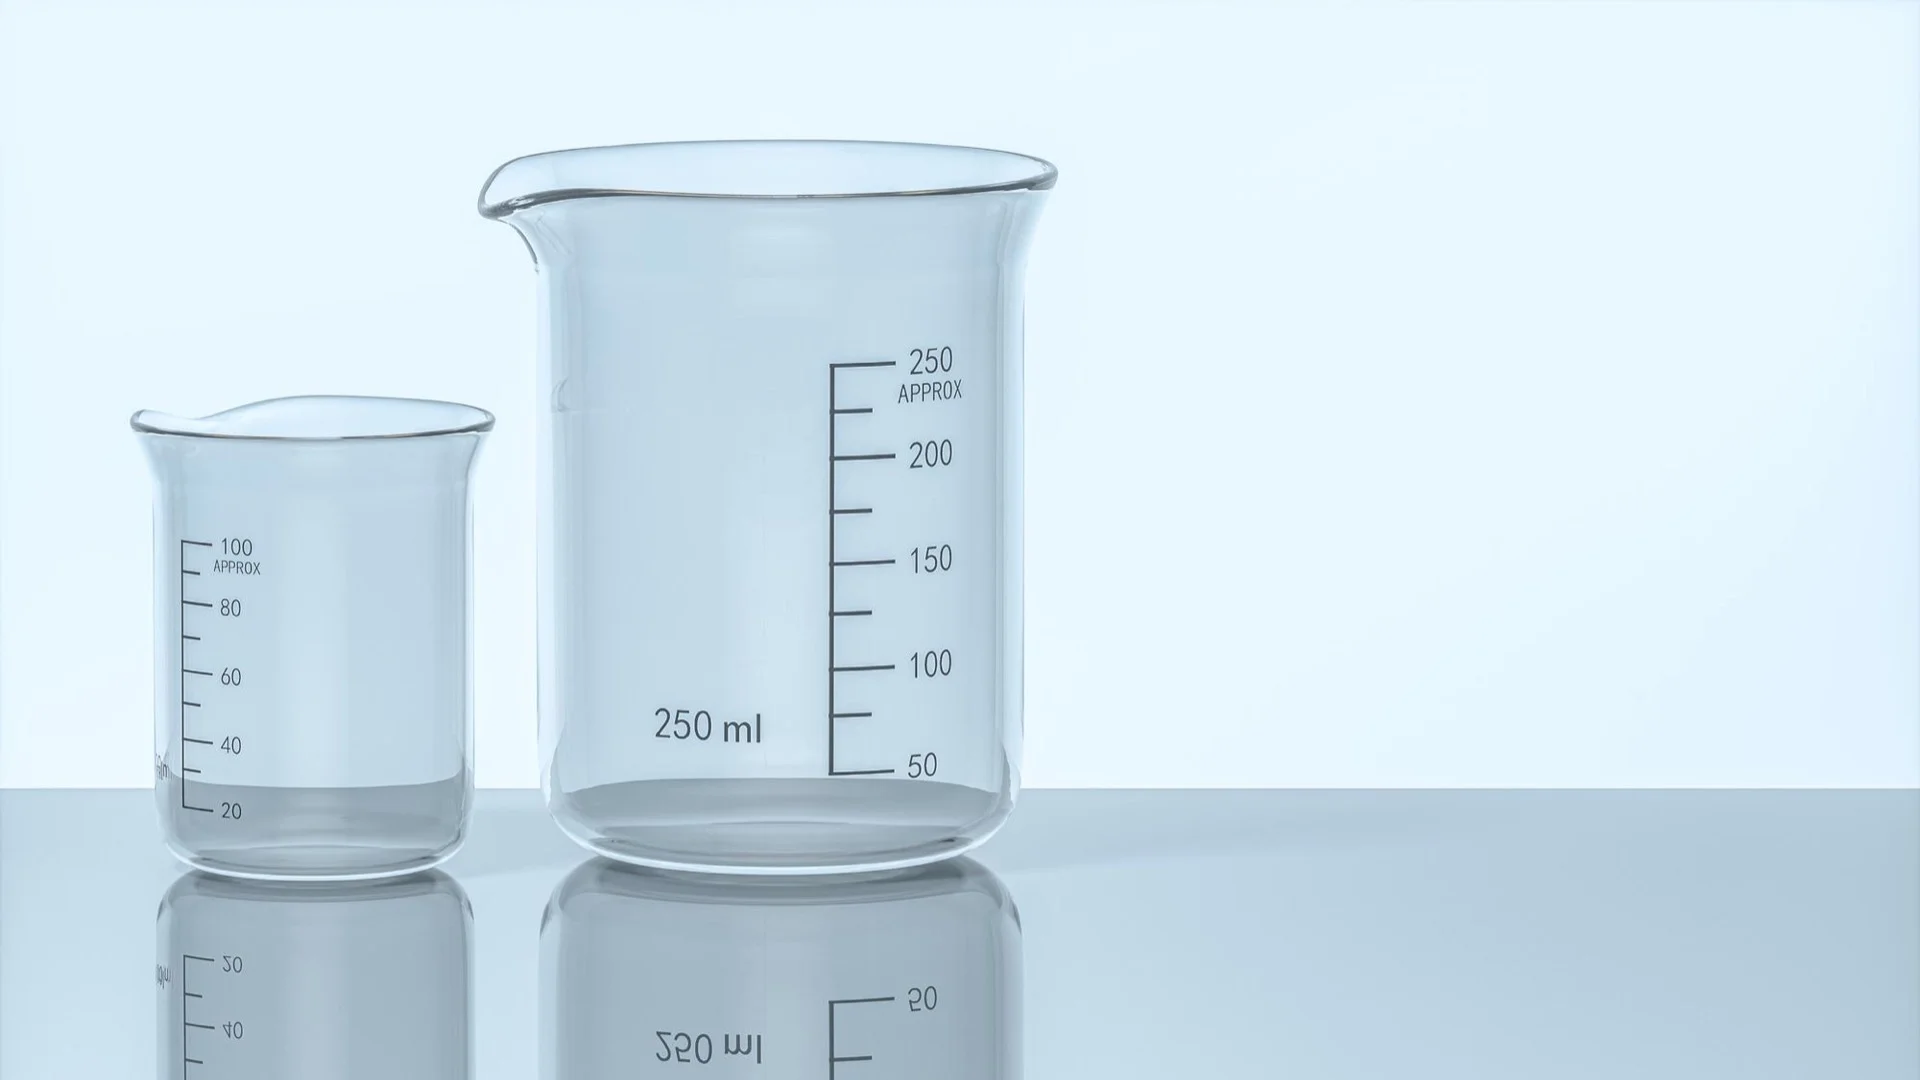 Metric System: Milliliters and Liters